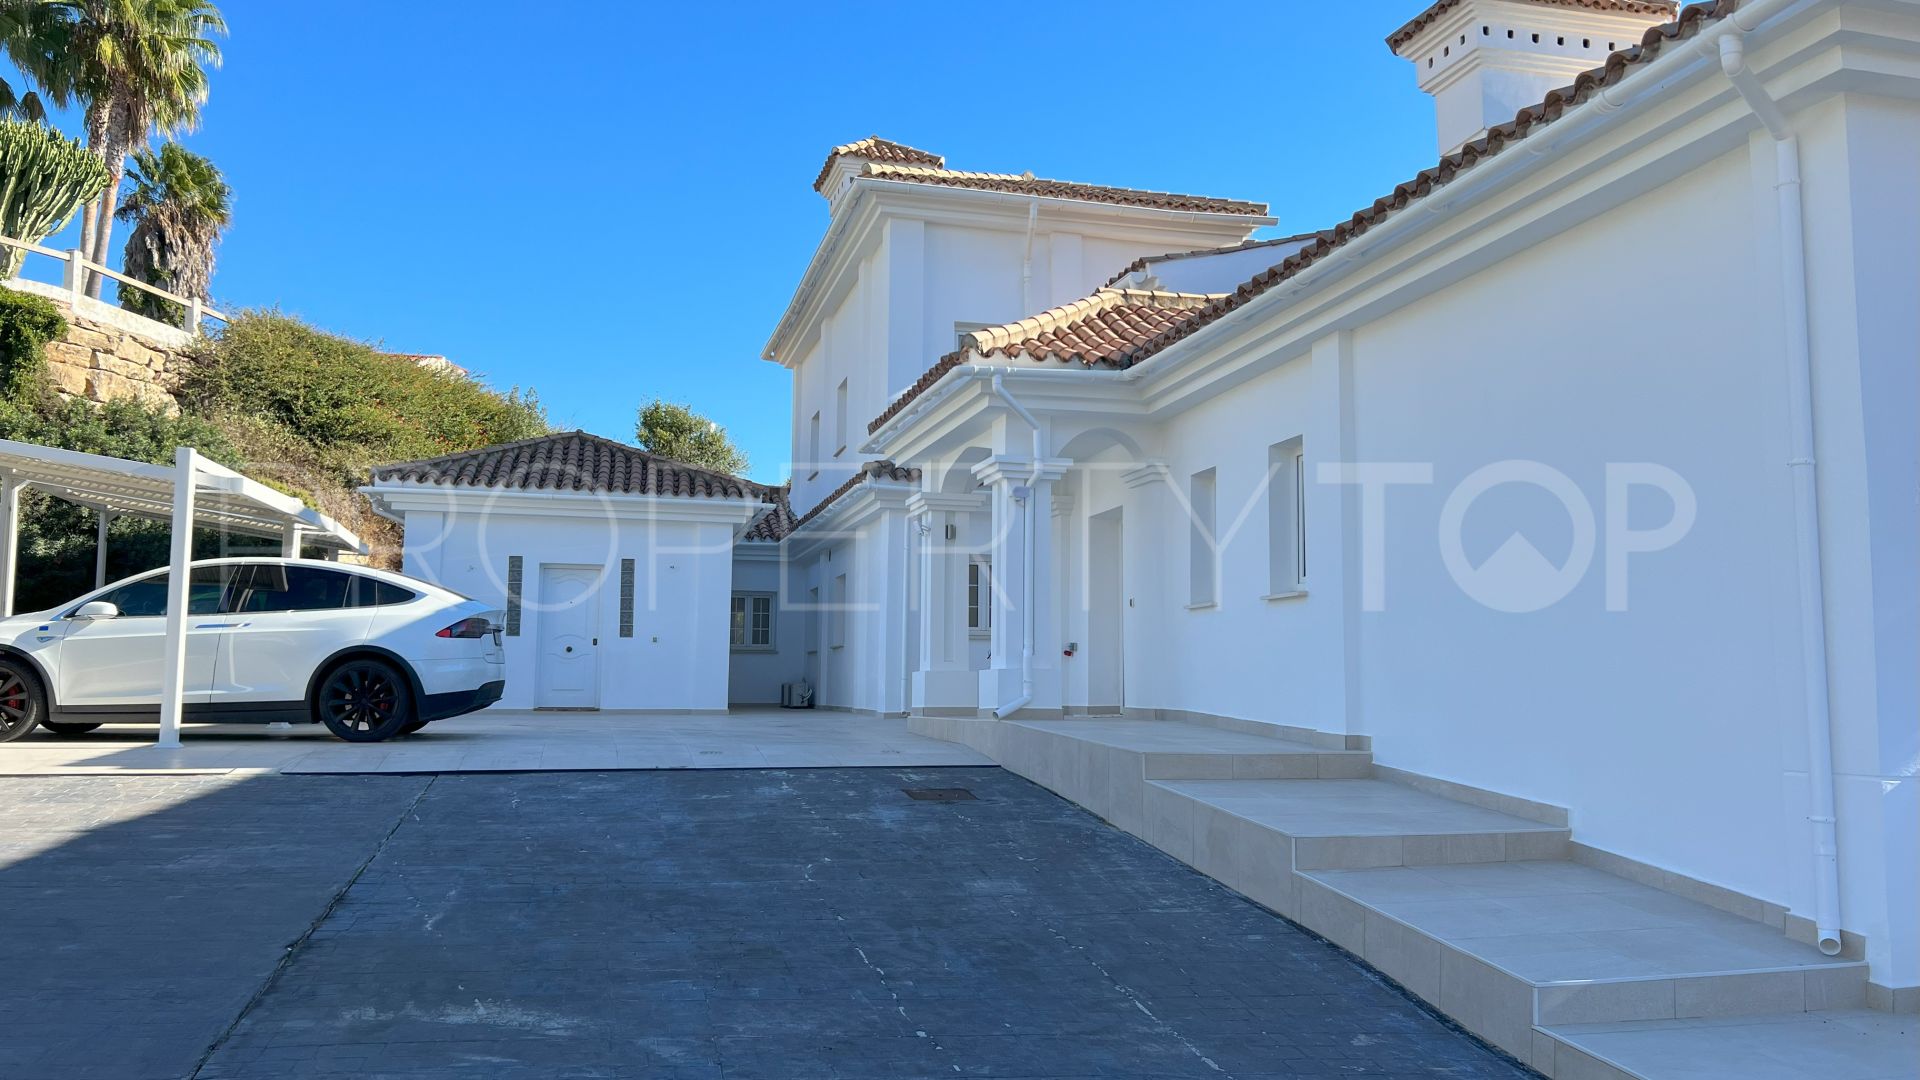 Villa for sale in Alcaidesa with 7 bedrooms